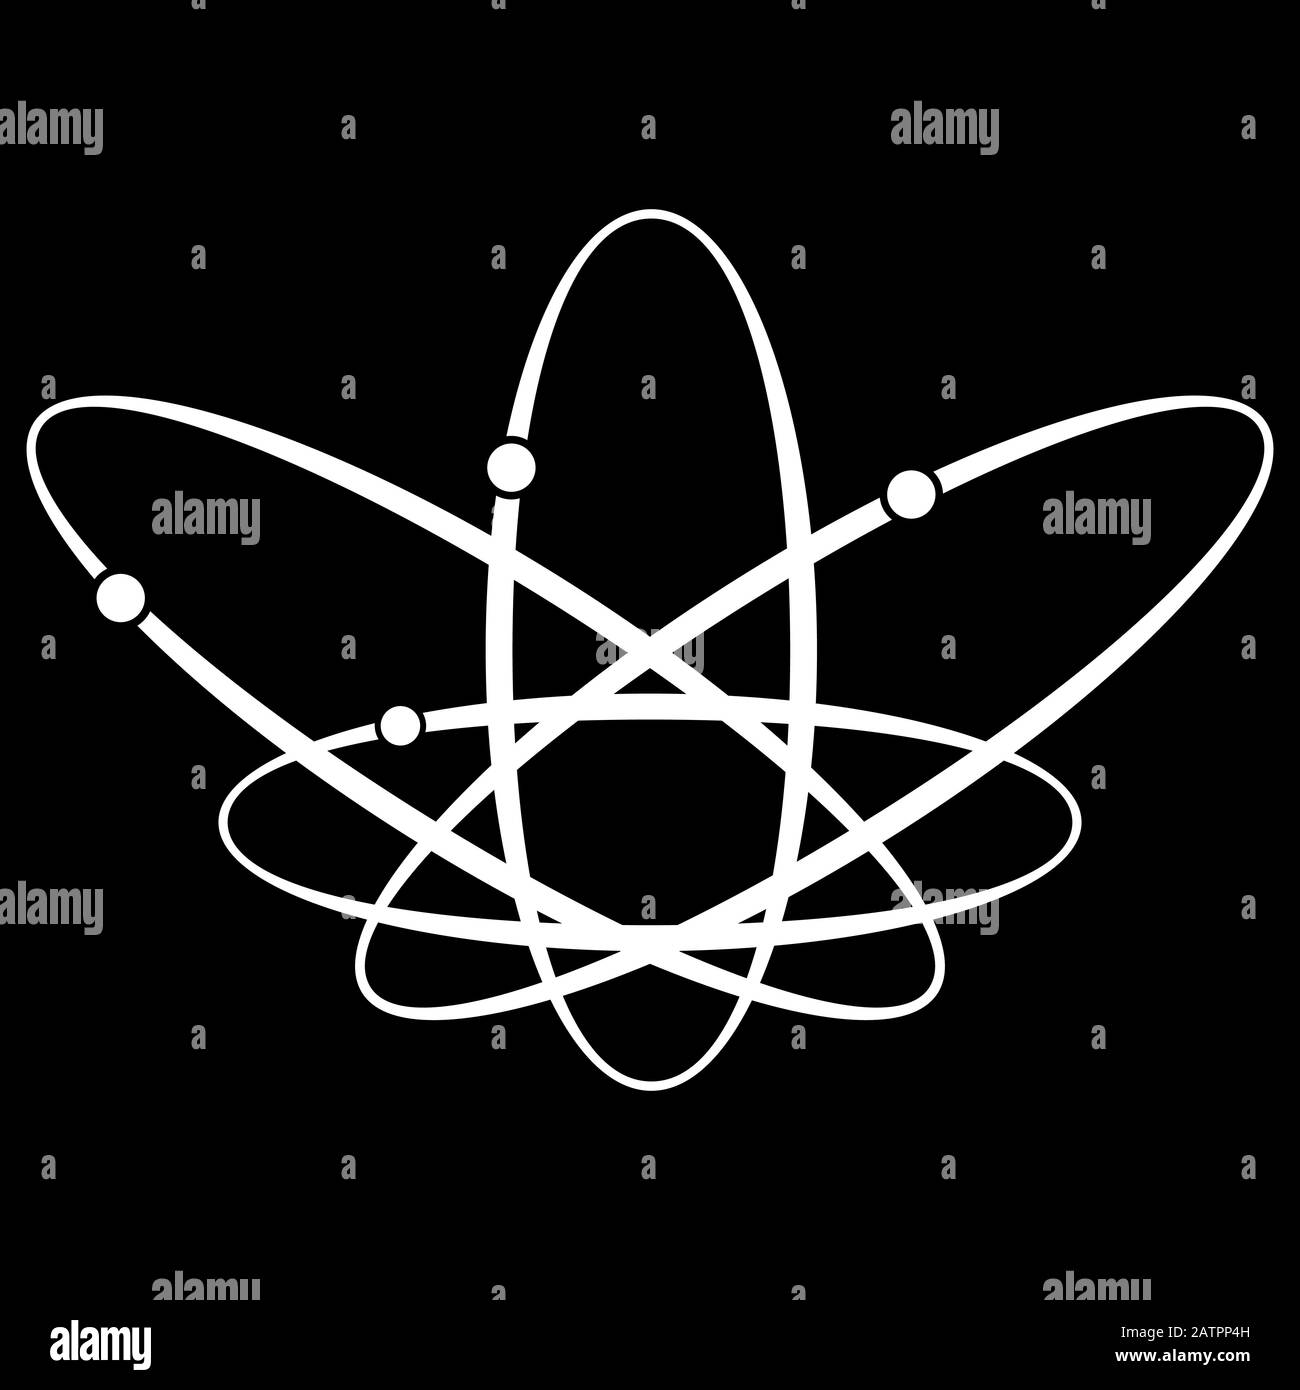 Electron Black and White Stock Photos & Images - Alamy